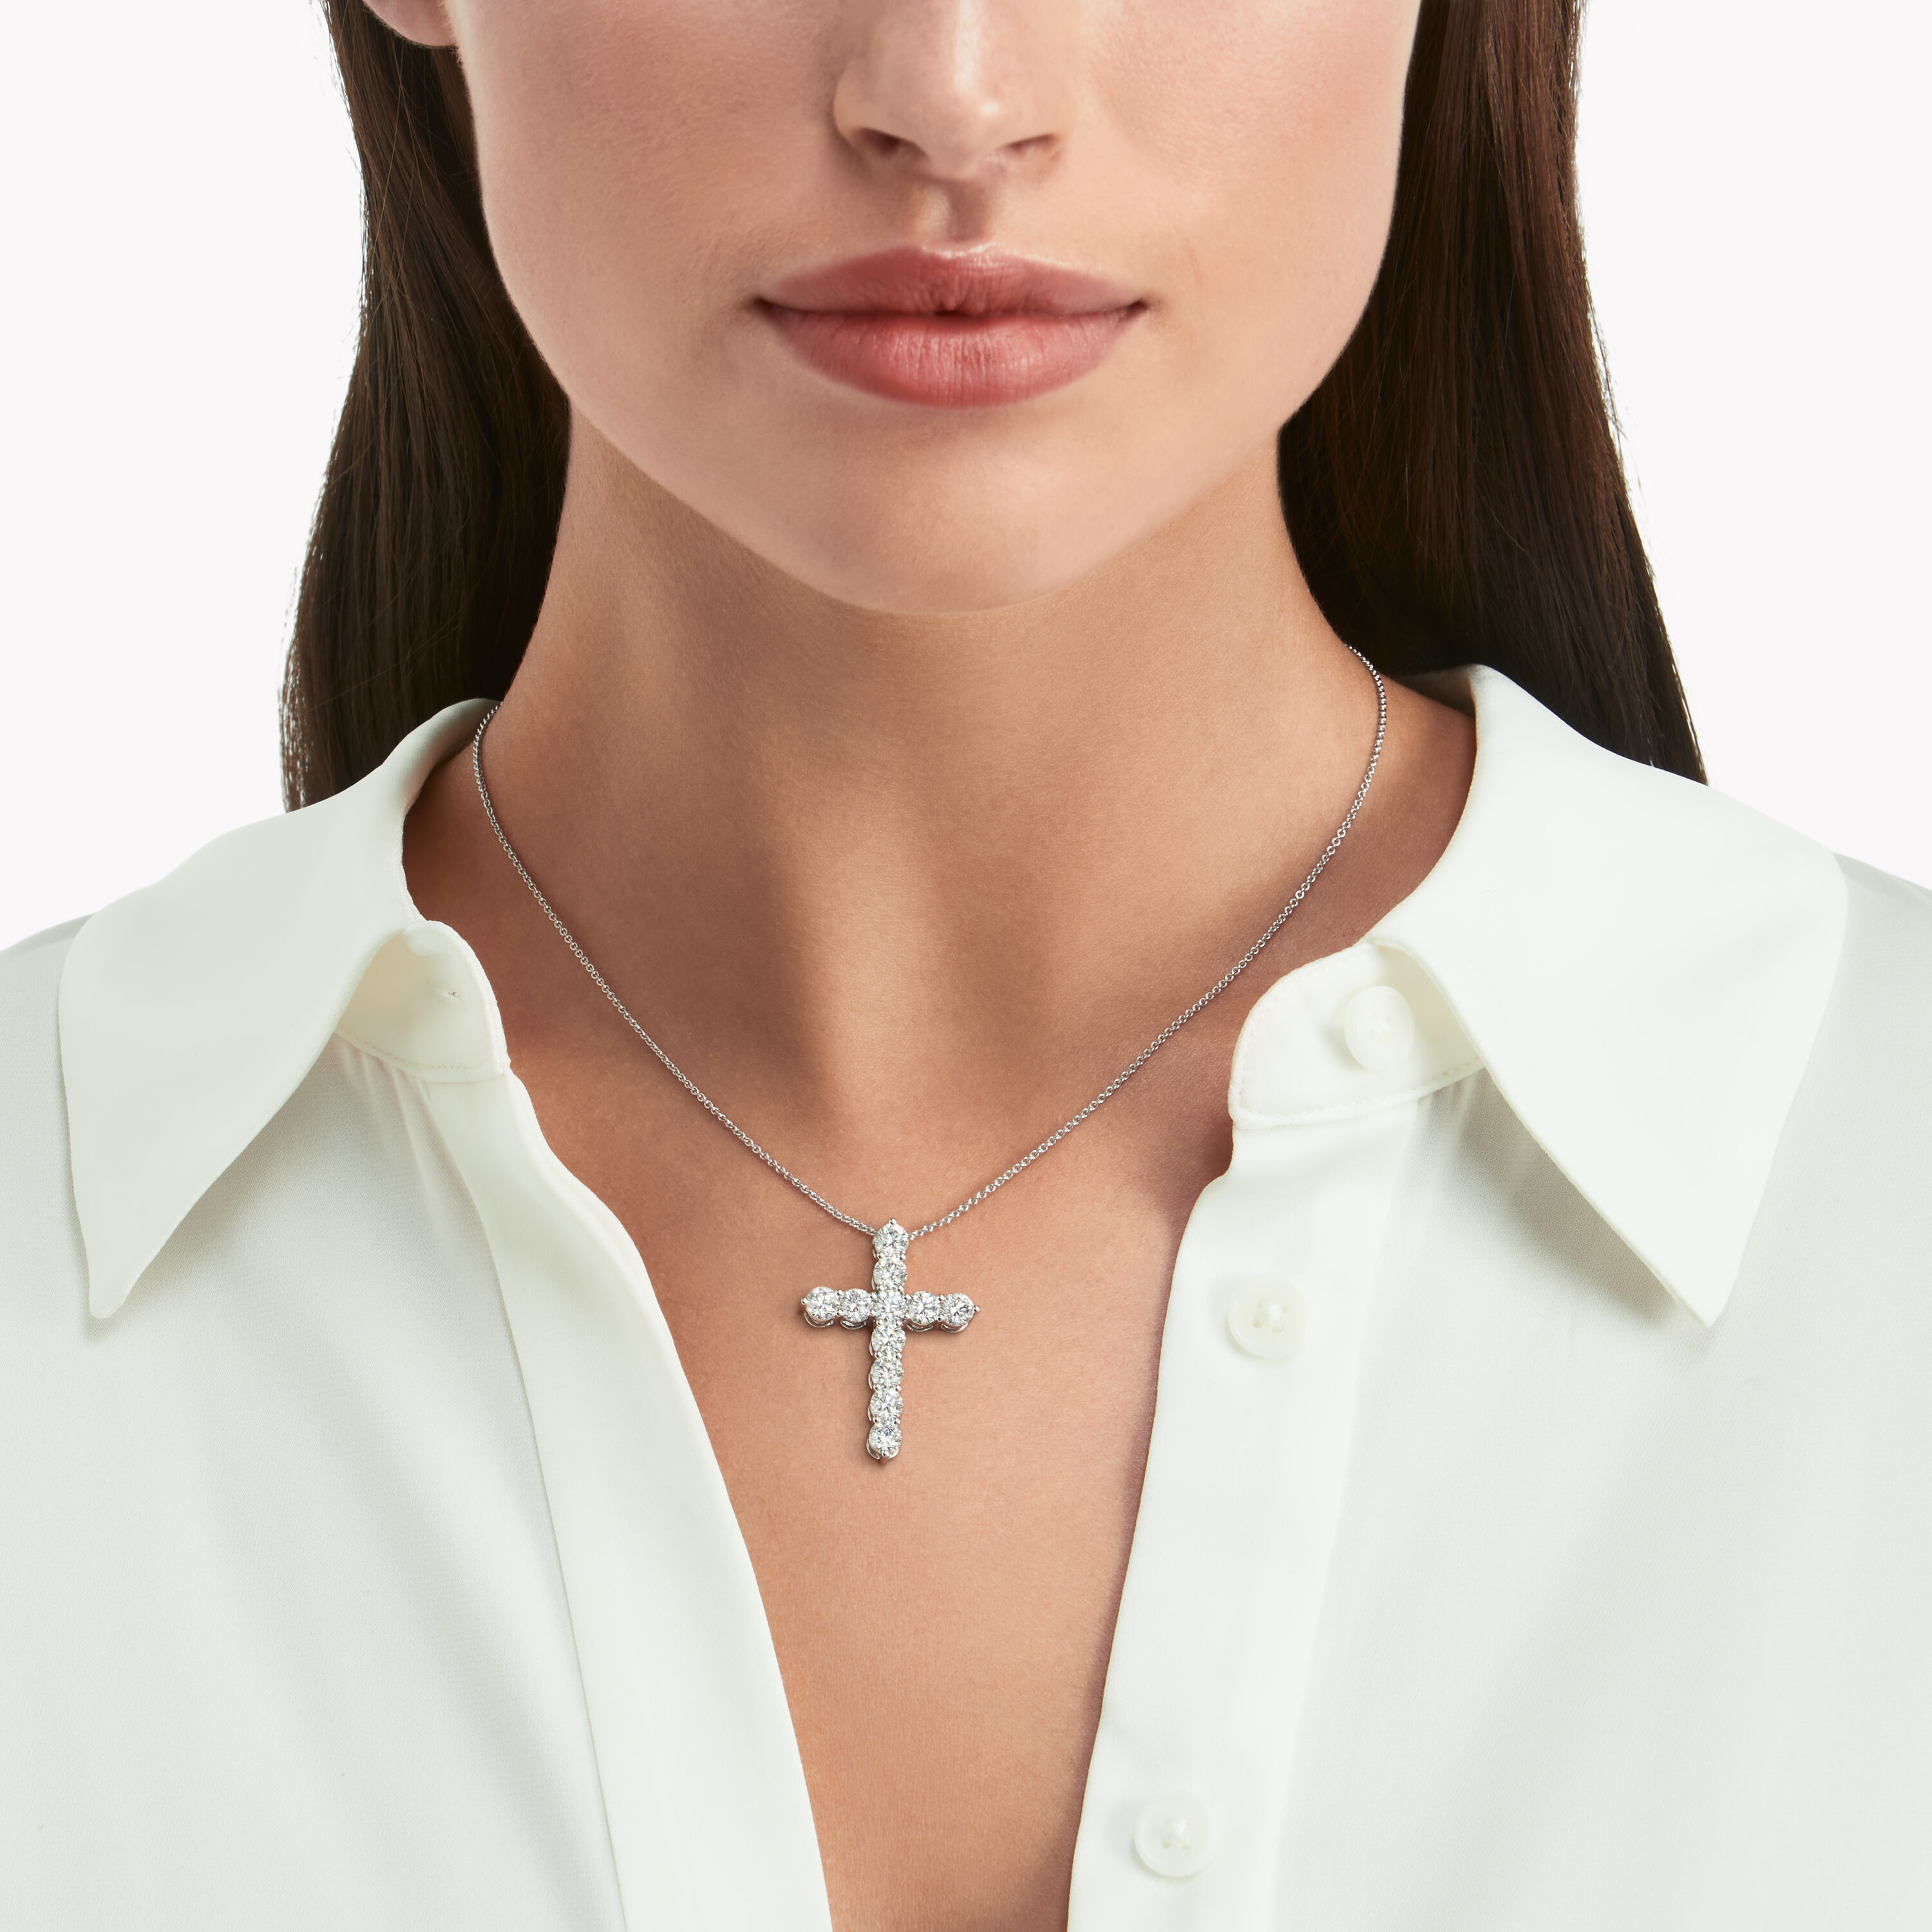 Diamond Cross Pendant Necklace in Solid 14k Gold, Large - Gold Cross  Necklace for Men and Women, Made in America (16